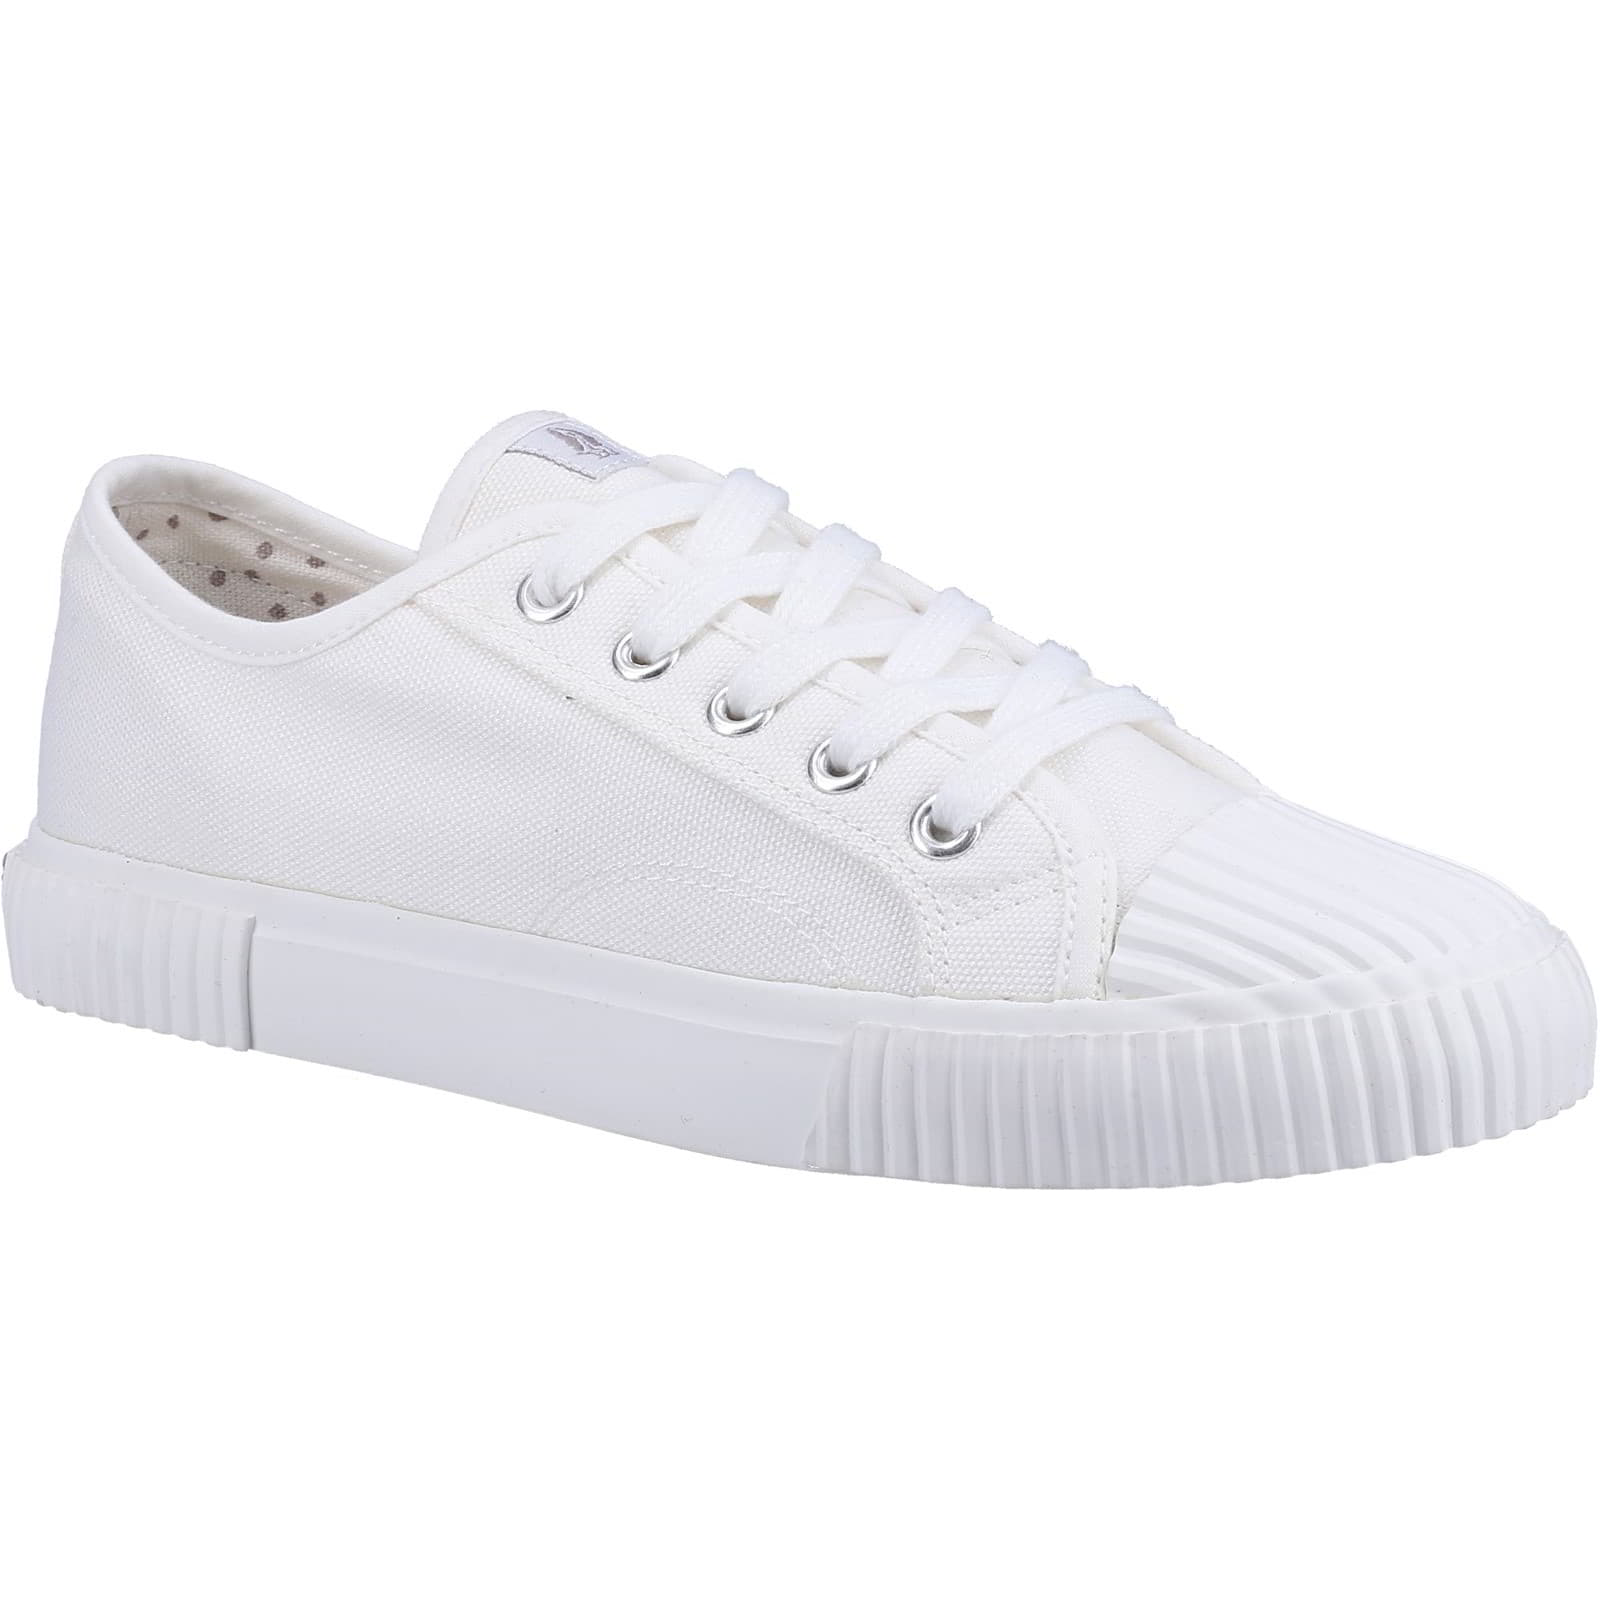 Hush Puppies Women's Brooke Lace Up Canvas Shoes Trainers - UK 7